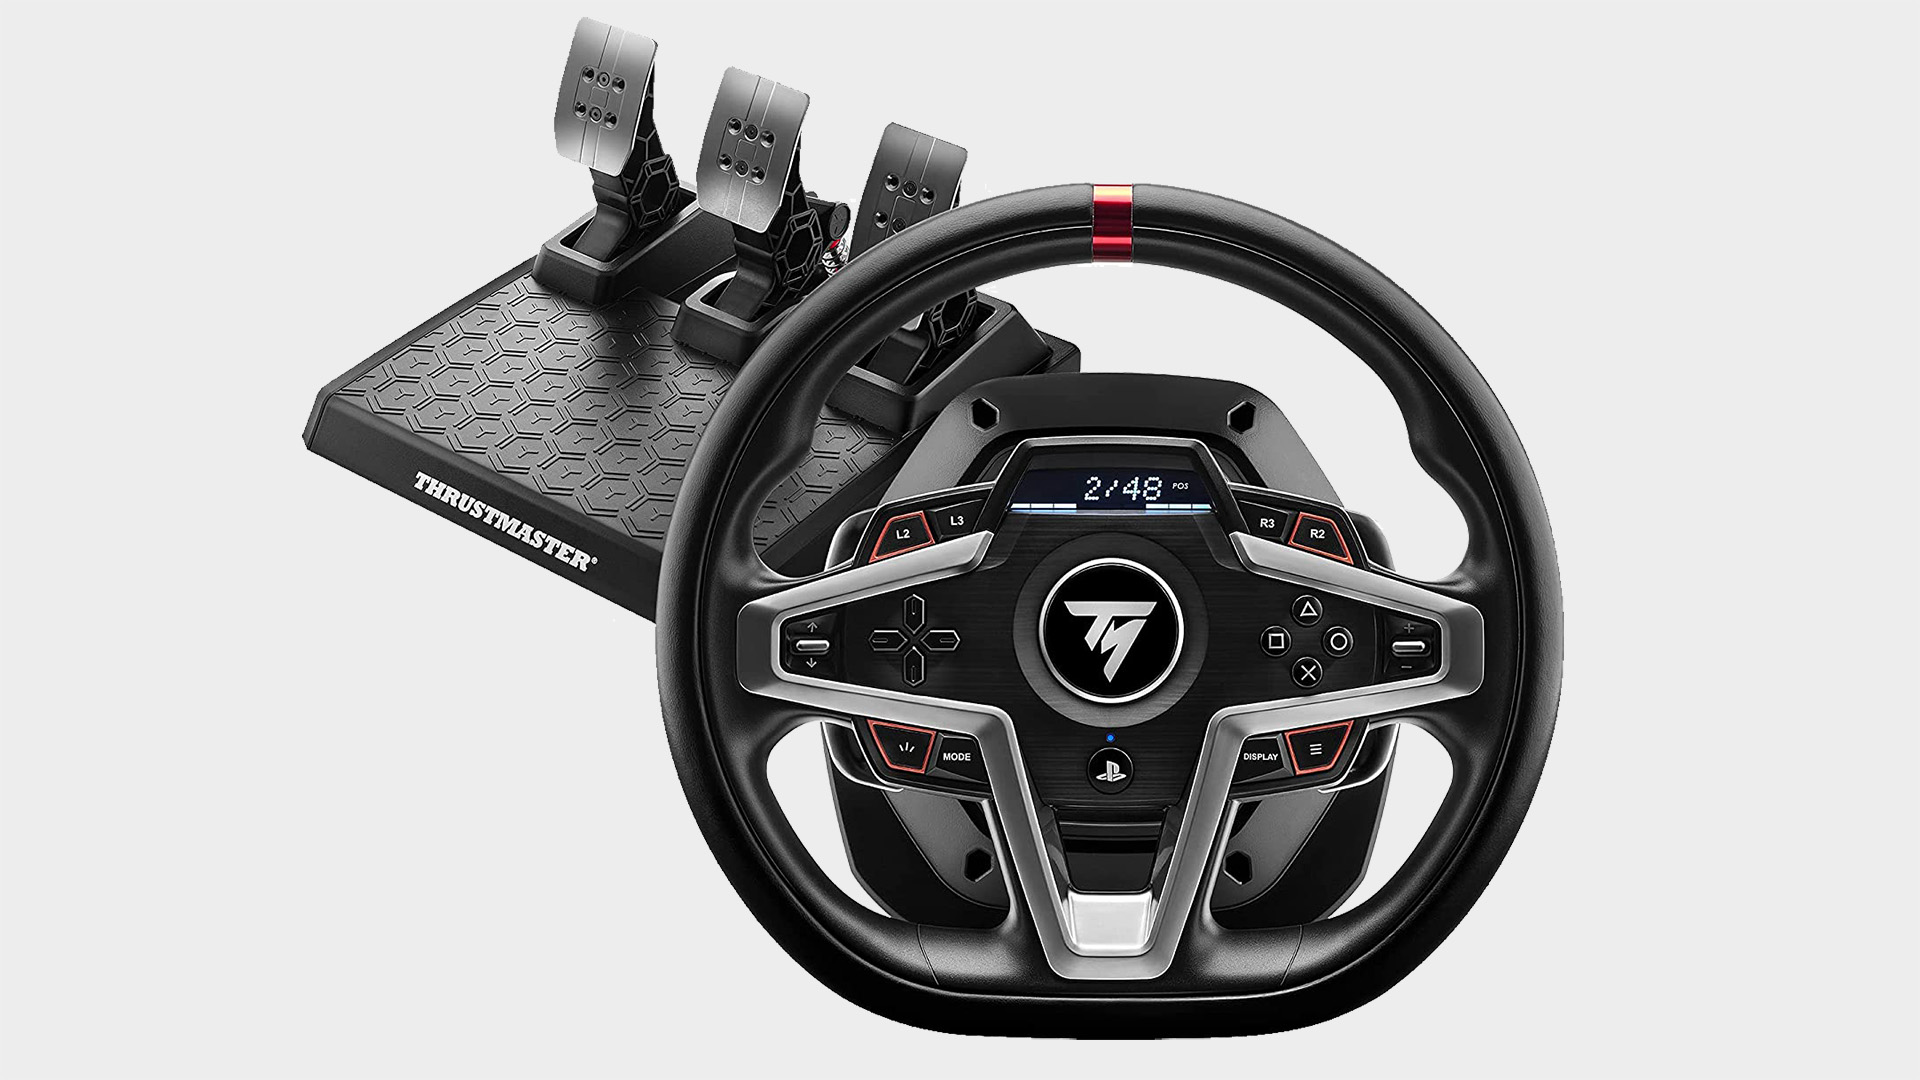 Thrustmaster T248 racing wheel with pedals